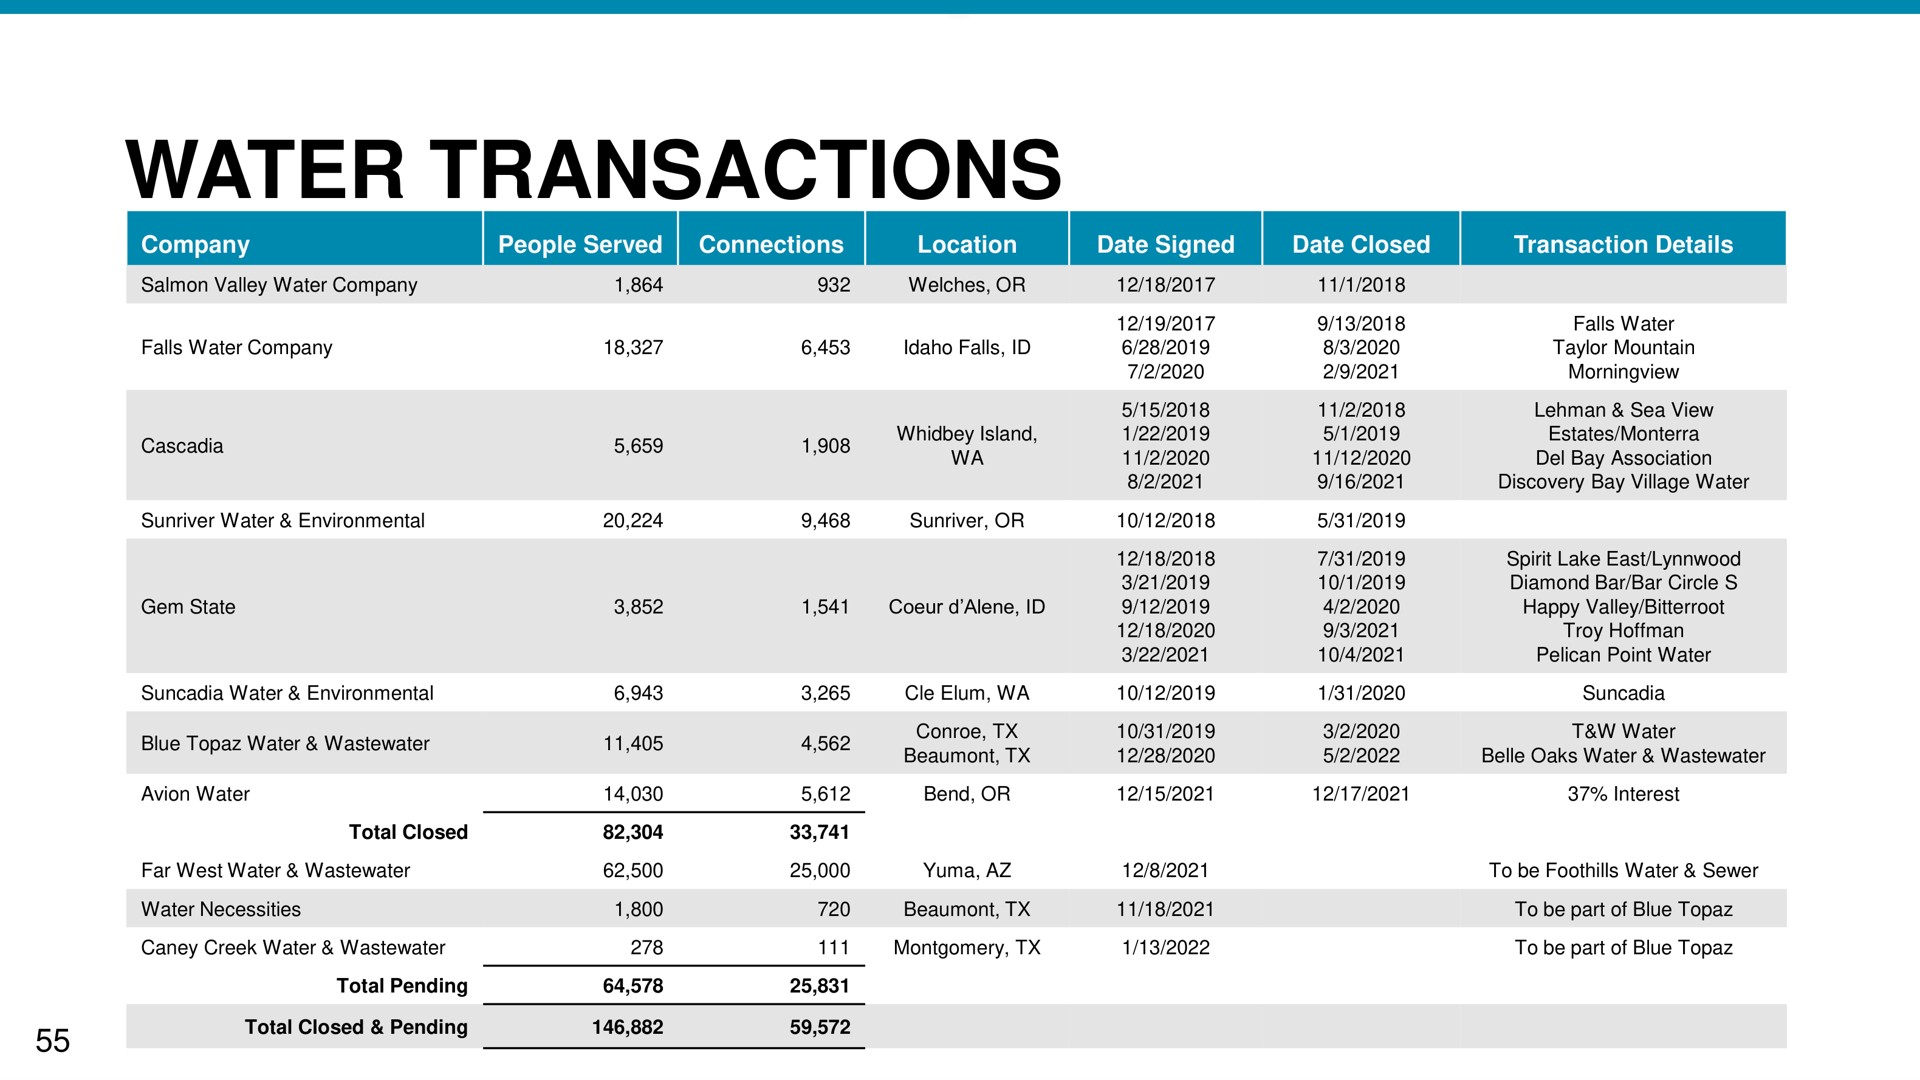 water transactions | NW Natural Holdings